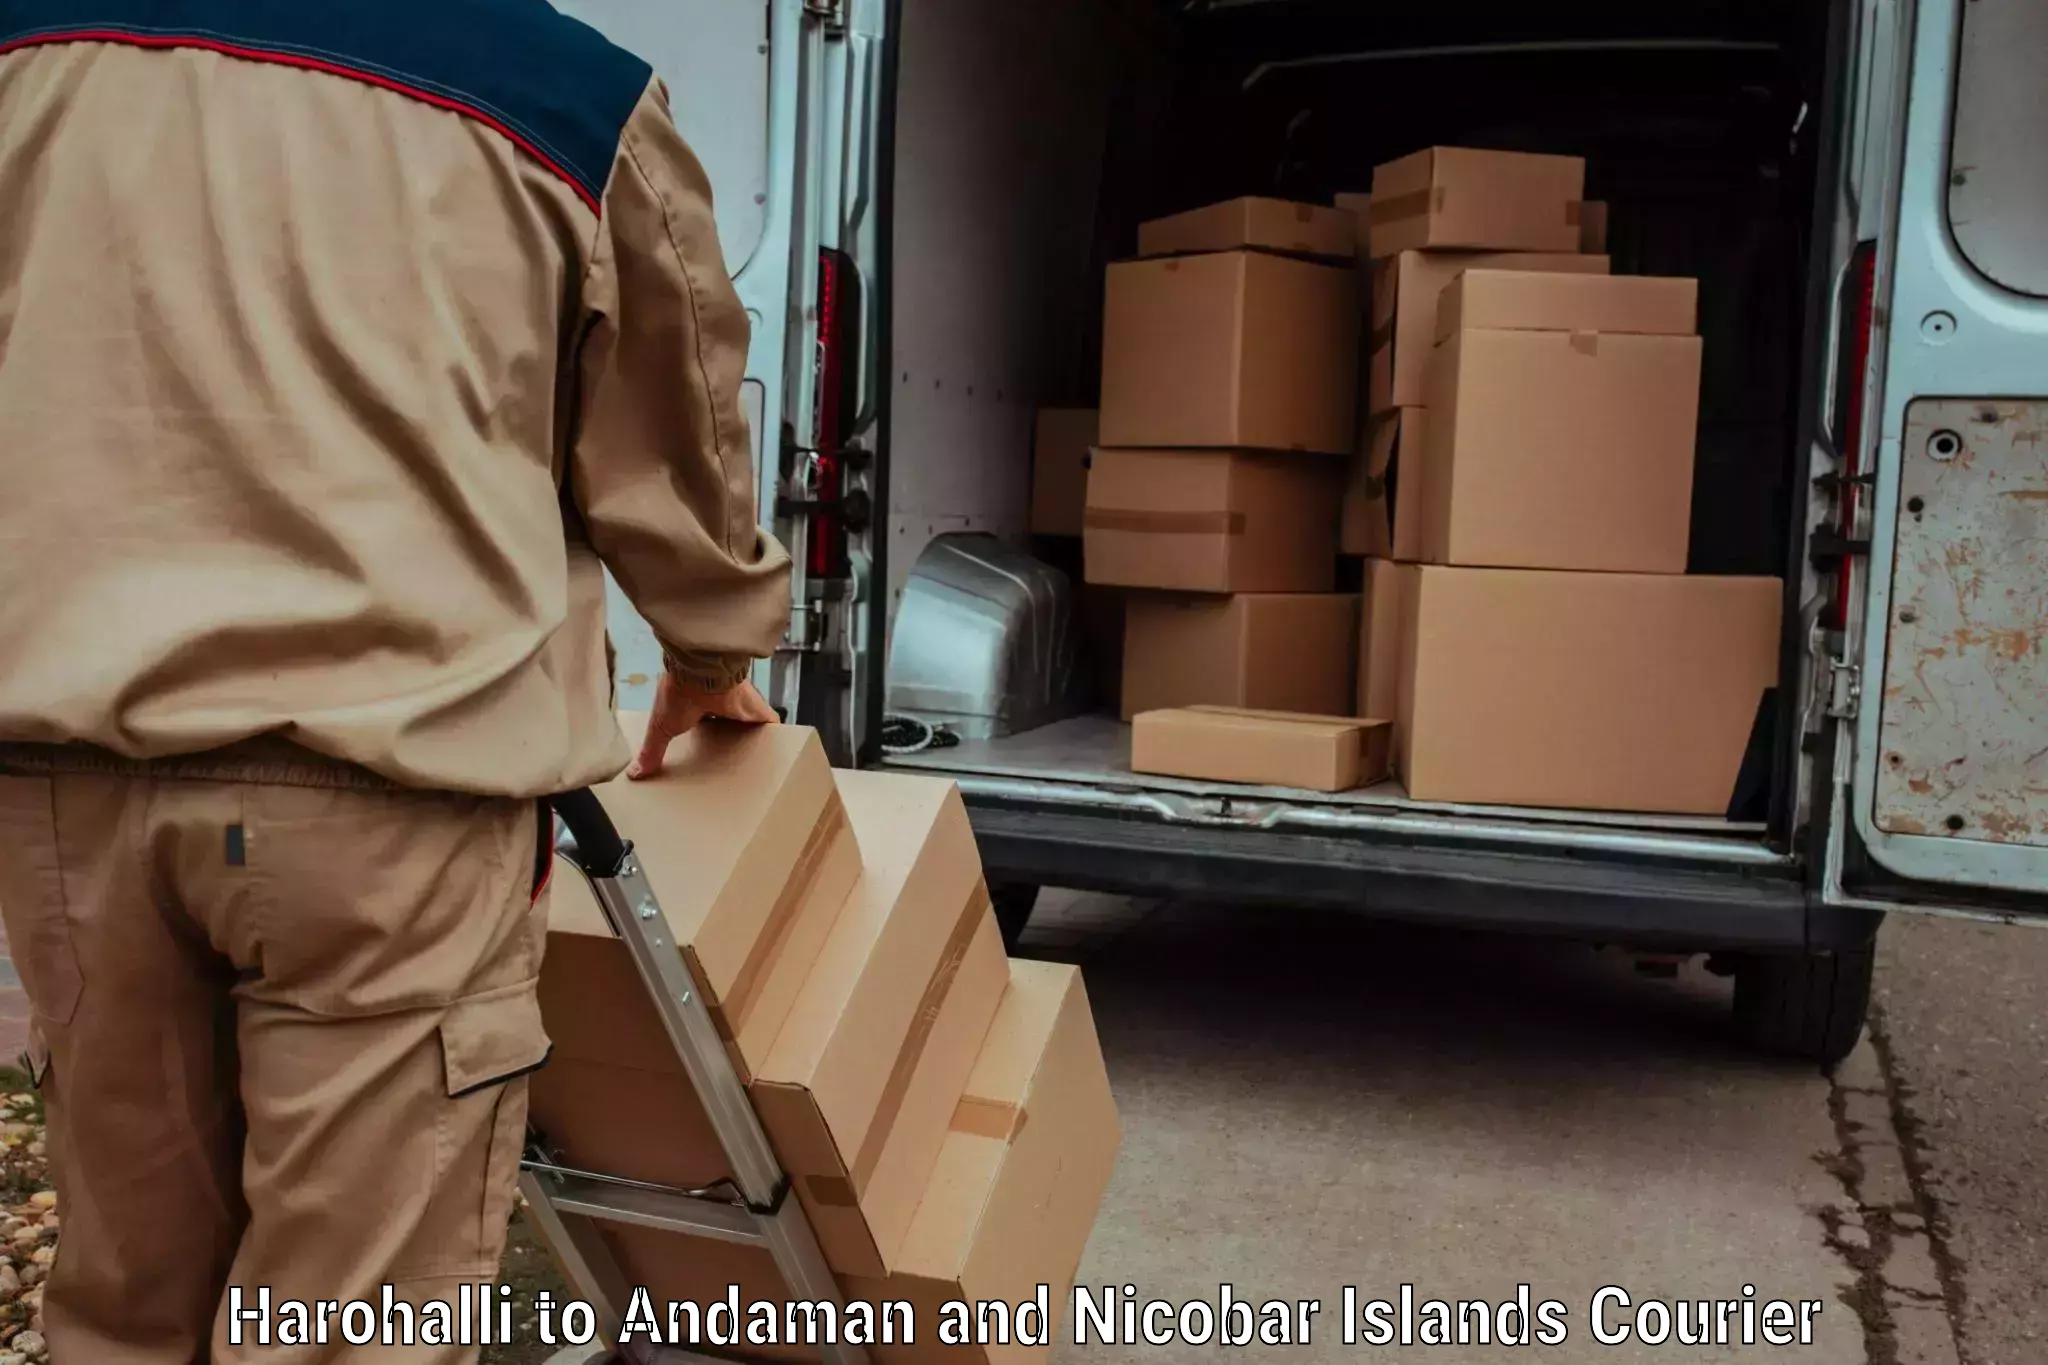 Courier dispatch services in Harohalli to Andaman and Nicobar Islands